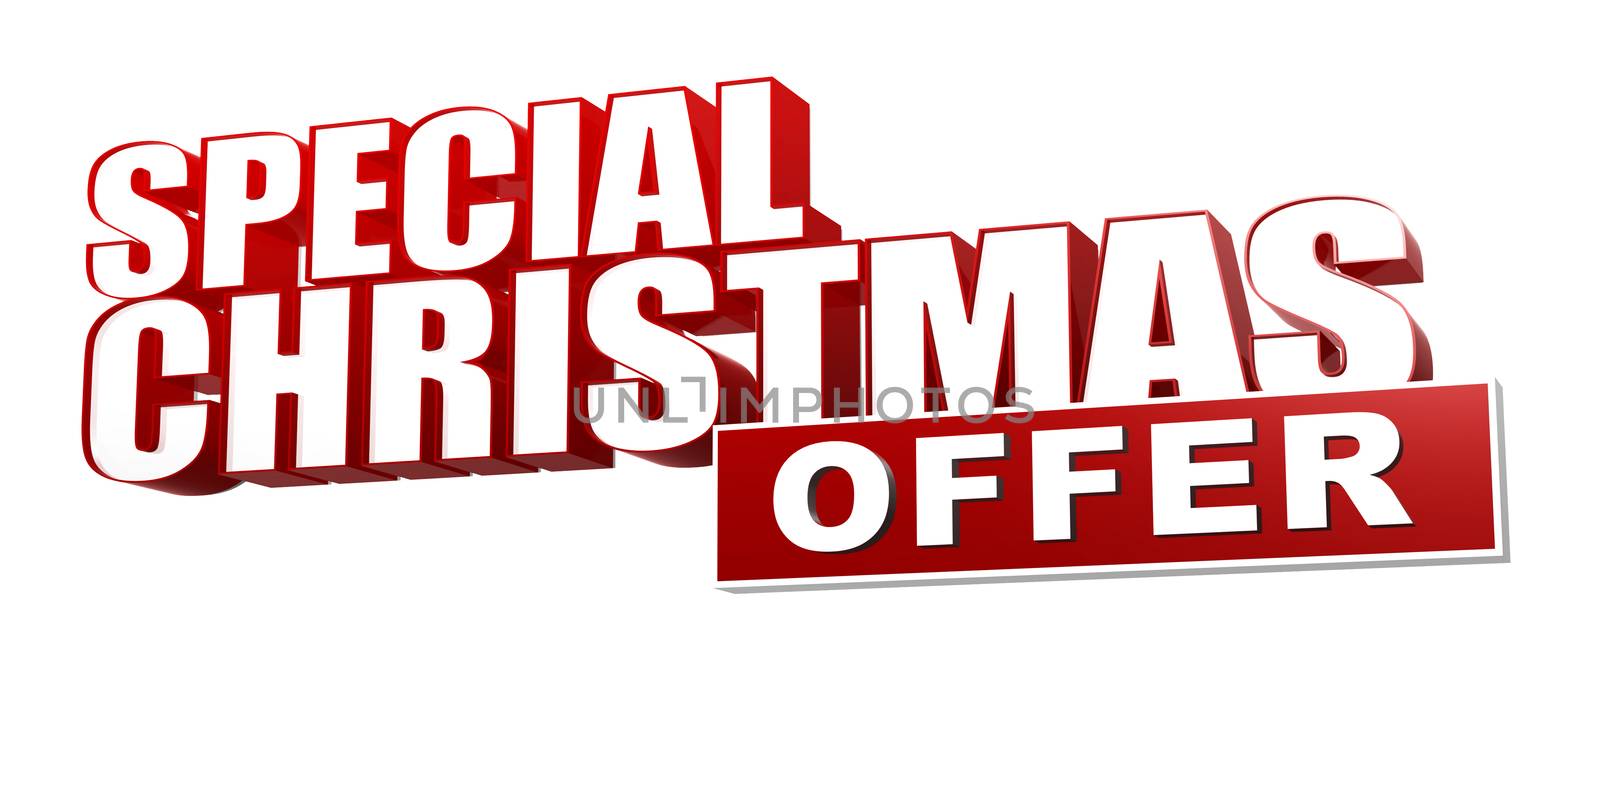 special christmas offer in 3d red letters and block over white background, business holiday concept